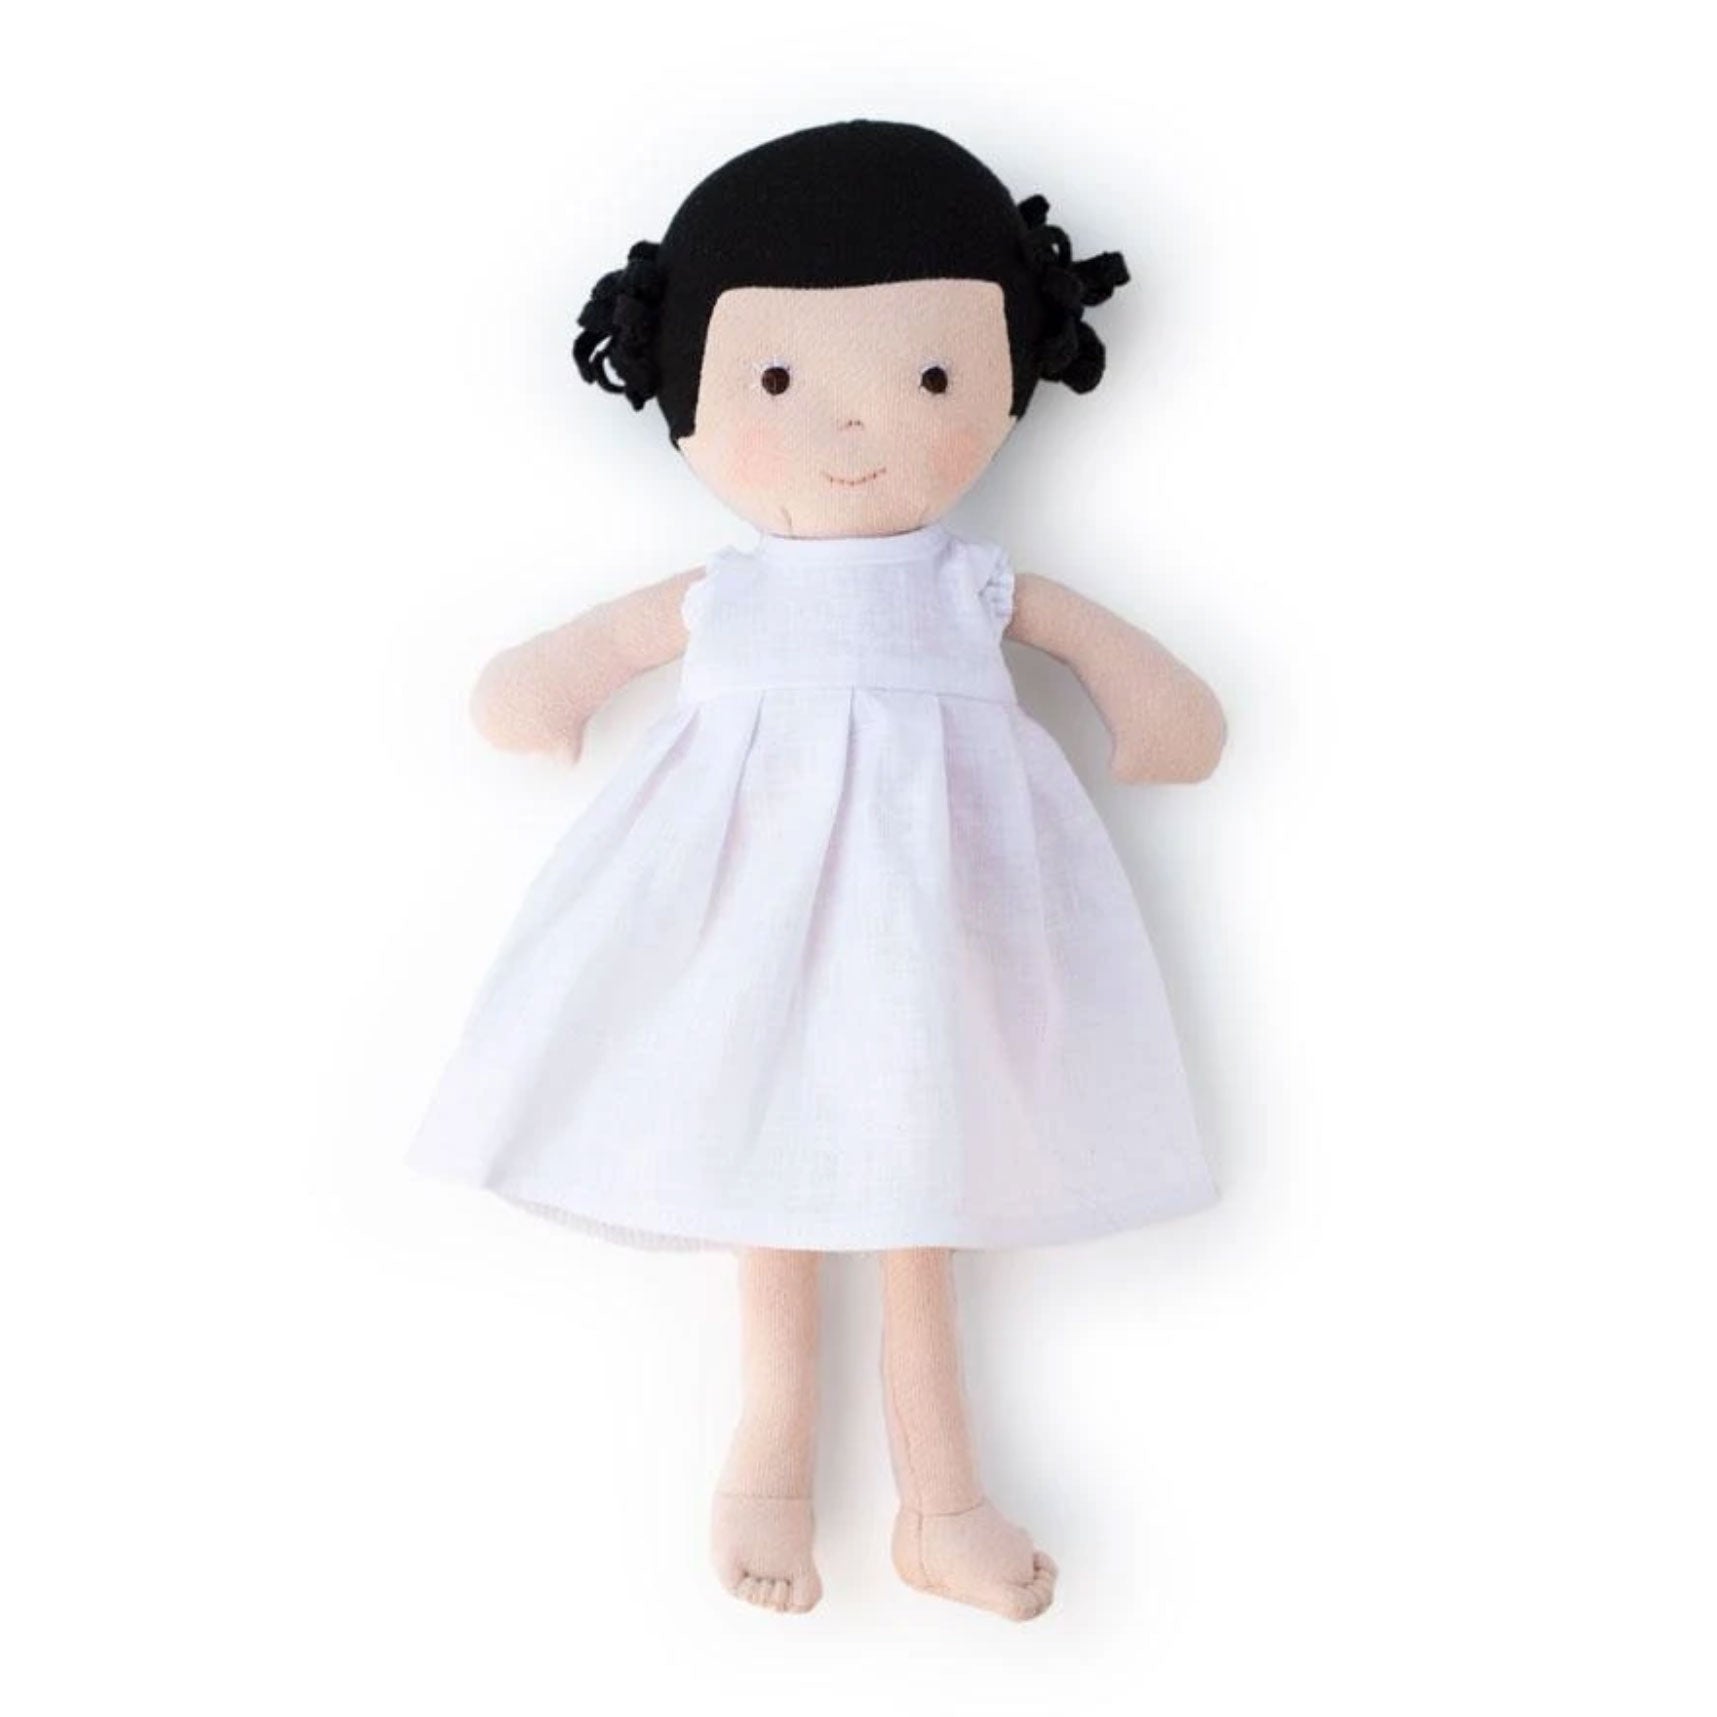 Hazel Village Nell soft doll at Bonjour Baby Baskets, luxury baby gifts